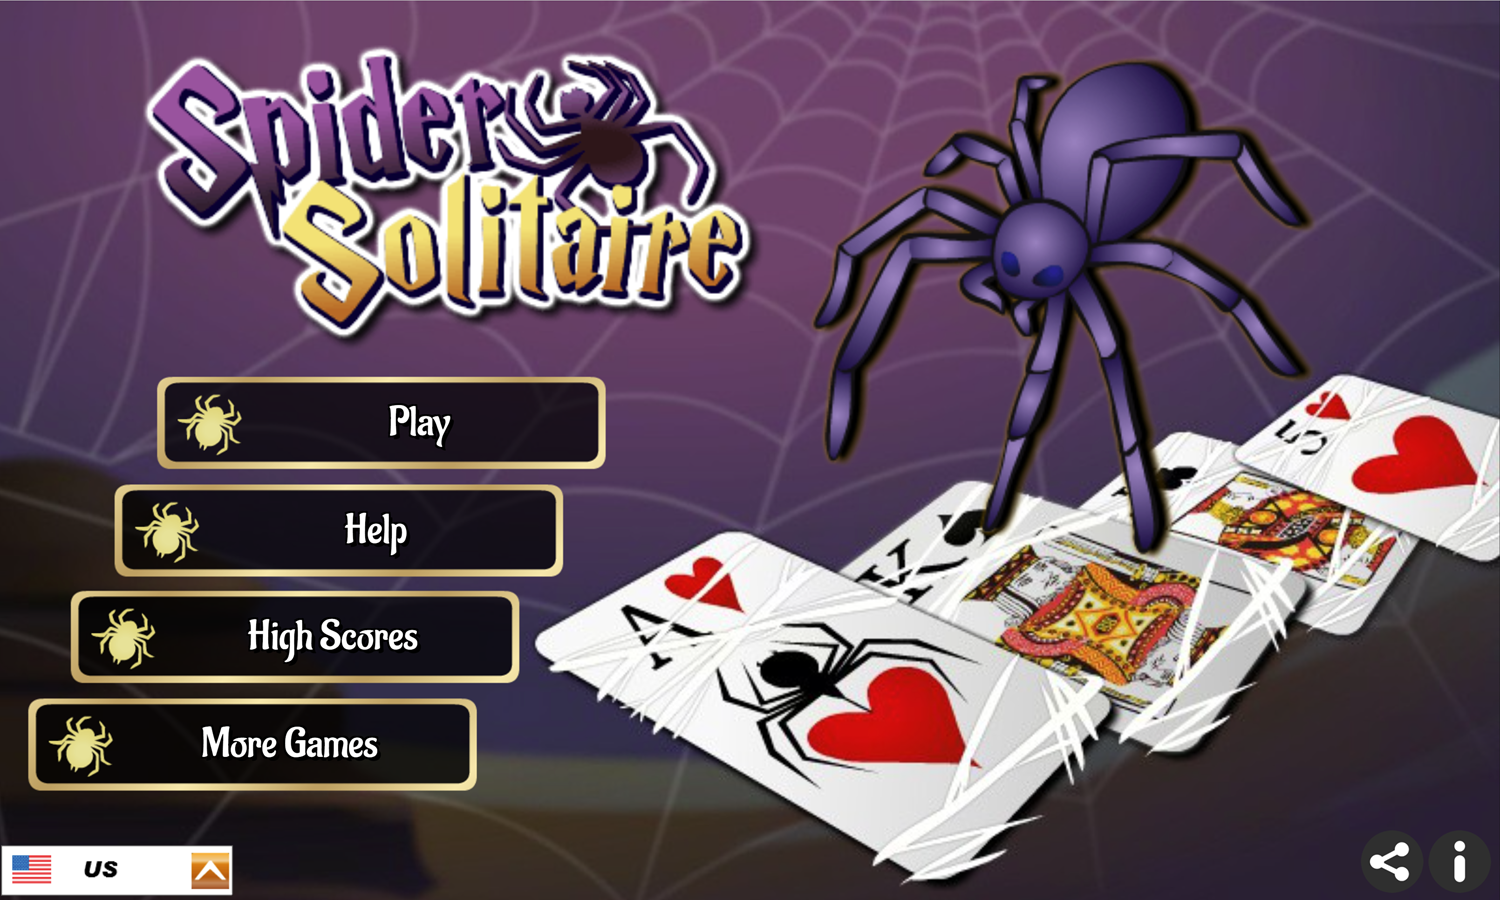 4 Suits Spider Solitaire Game Welcome Screen Screenshot.